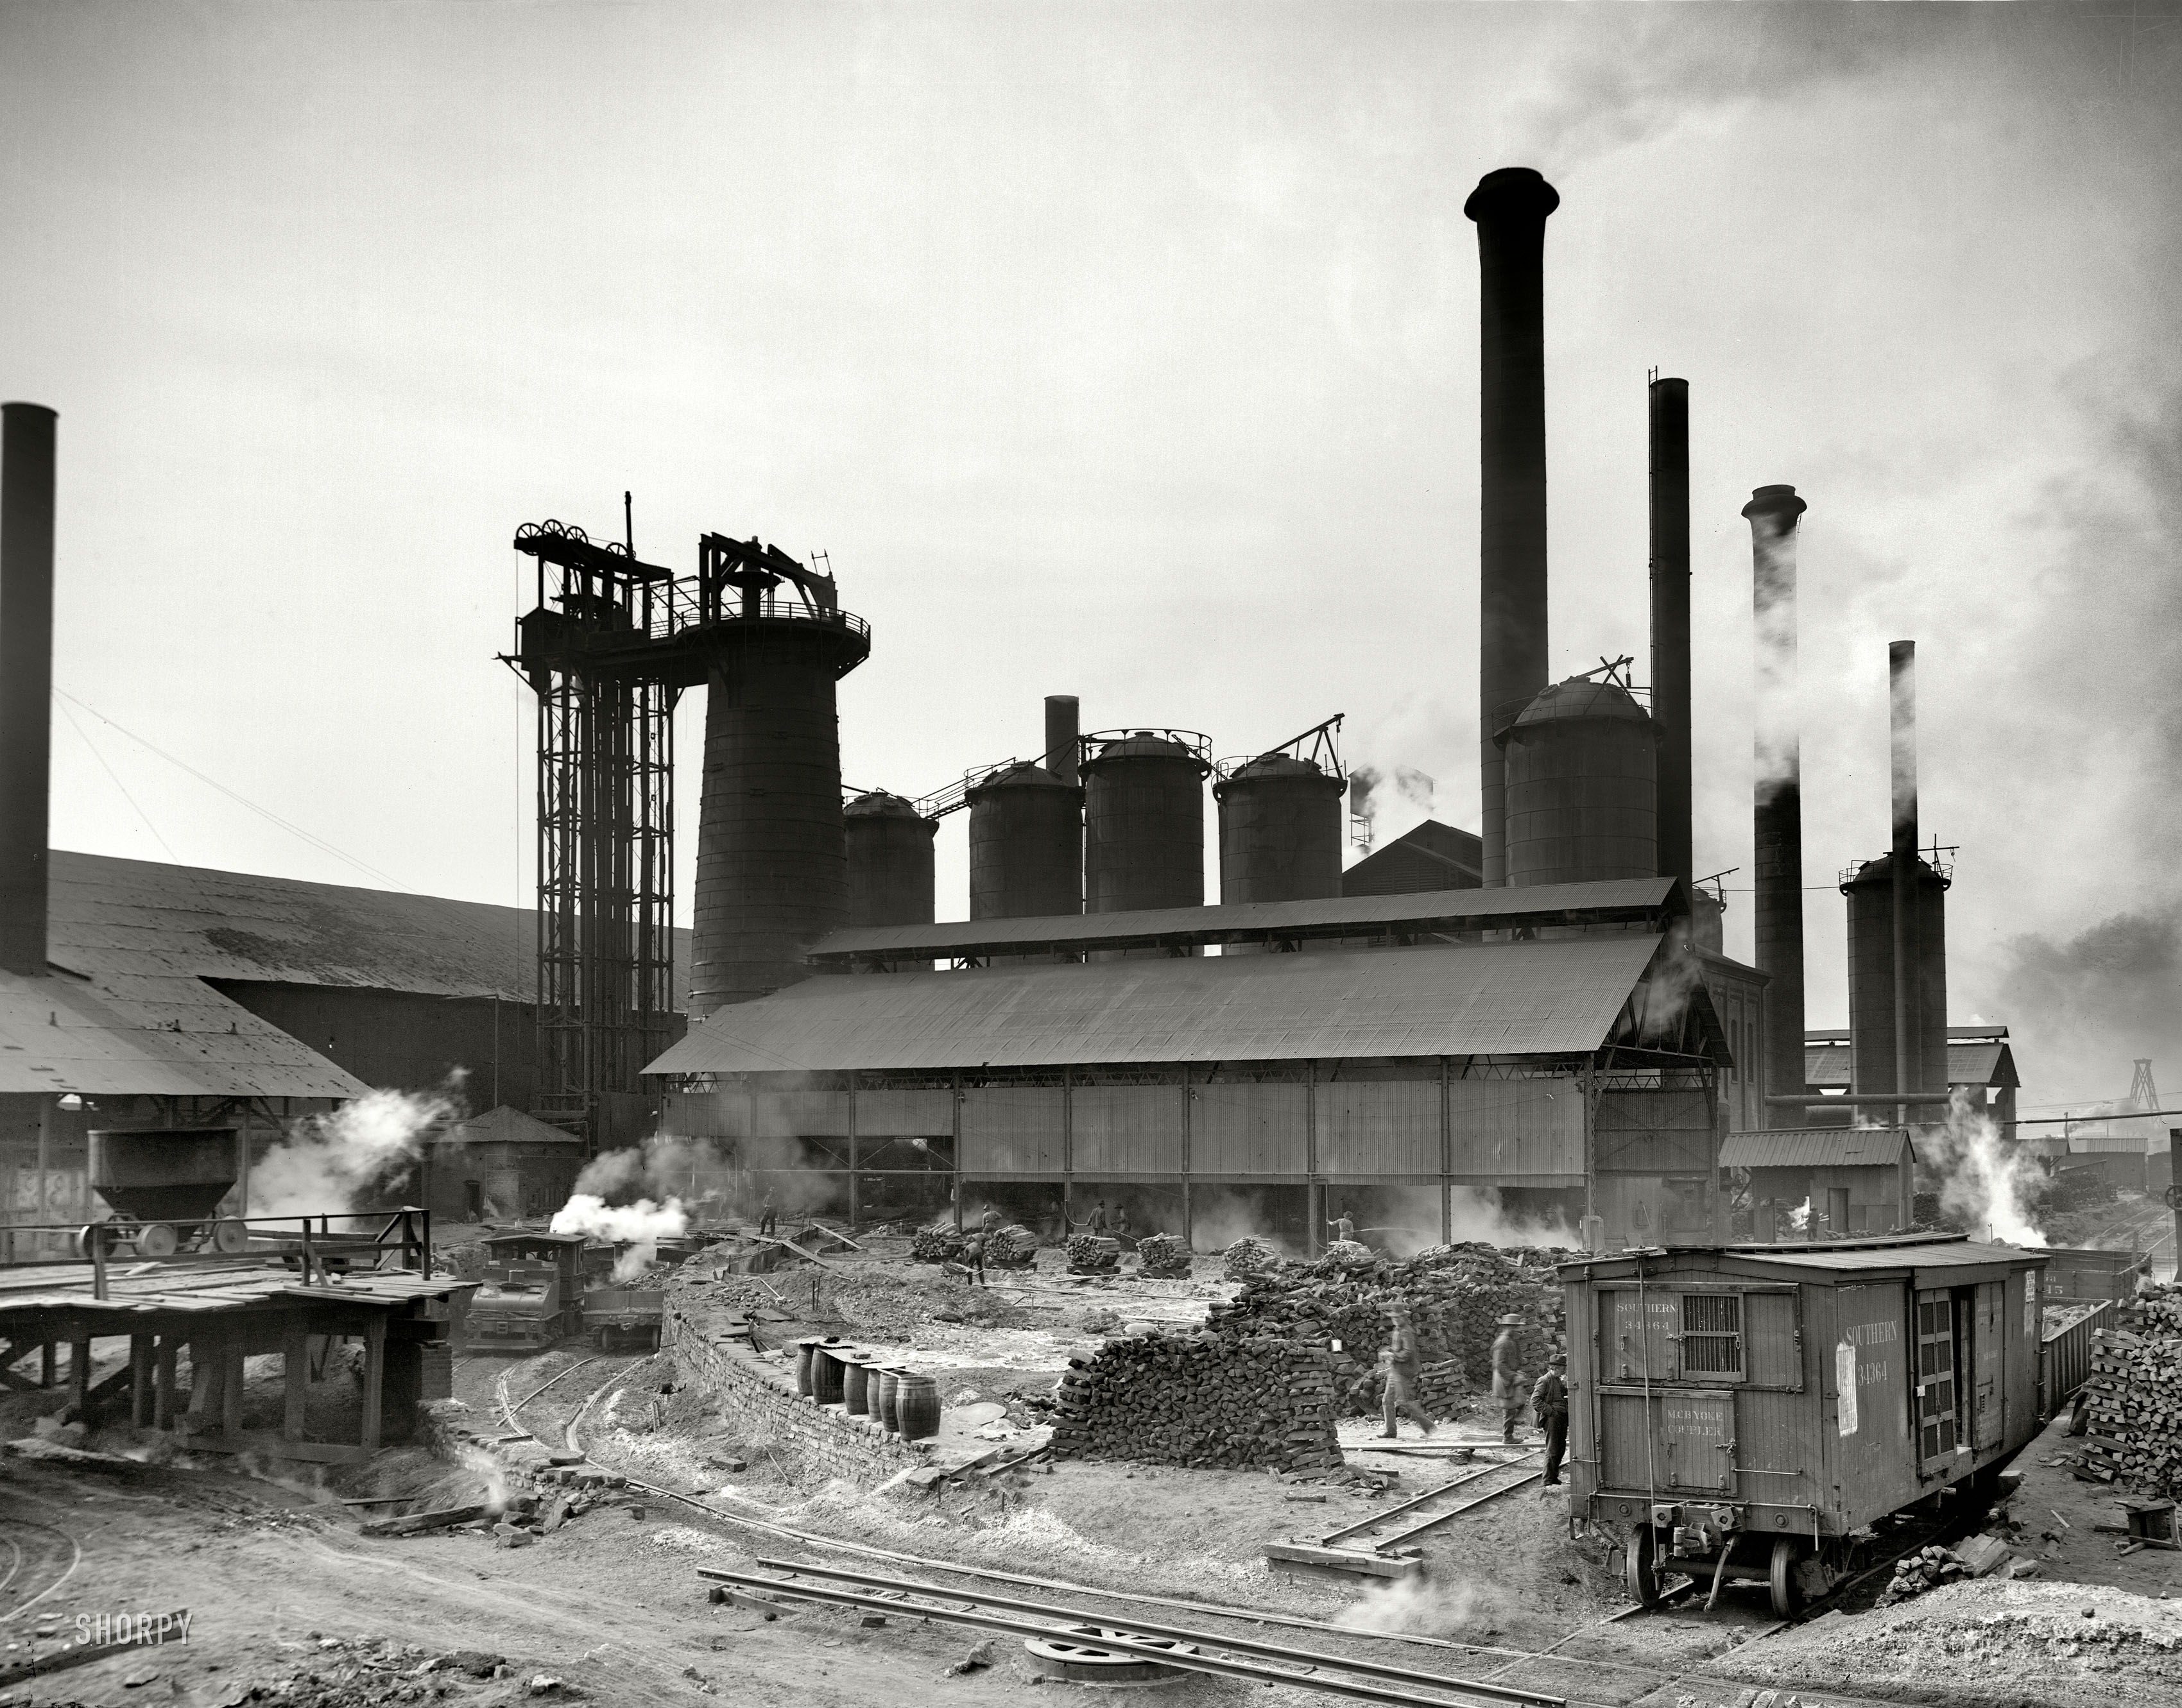 Birmingham, Alabama, circa 1906. "Sloss City furnaces." Four years later, our site's namesake, Shorpy Higginbotham, would be working for the Sloss-Sheffield Iron Co. at nearby Bessie Mine, helping to supply coal for the furnaces at this steel mill. 8x10 inch glass negative, Detroit Publishing Co. View full size.